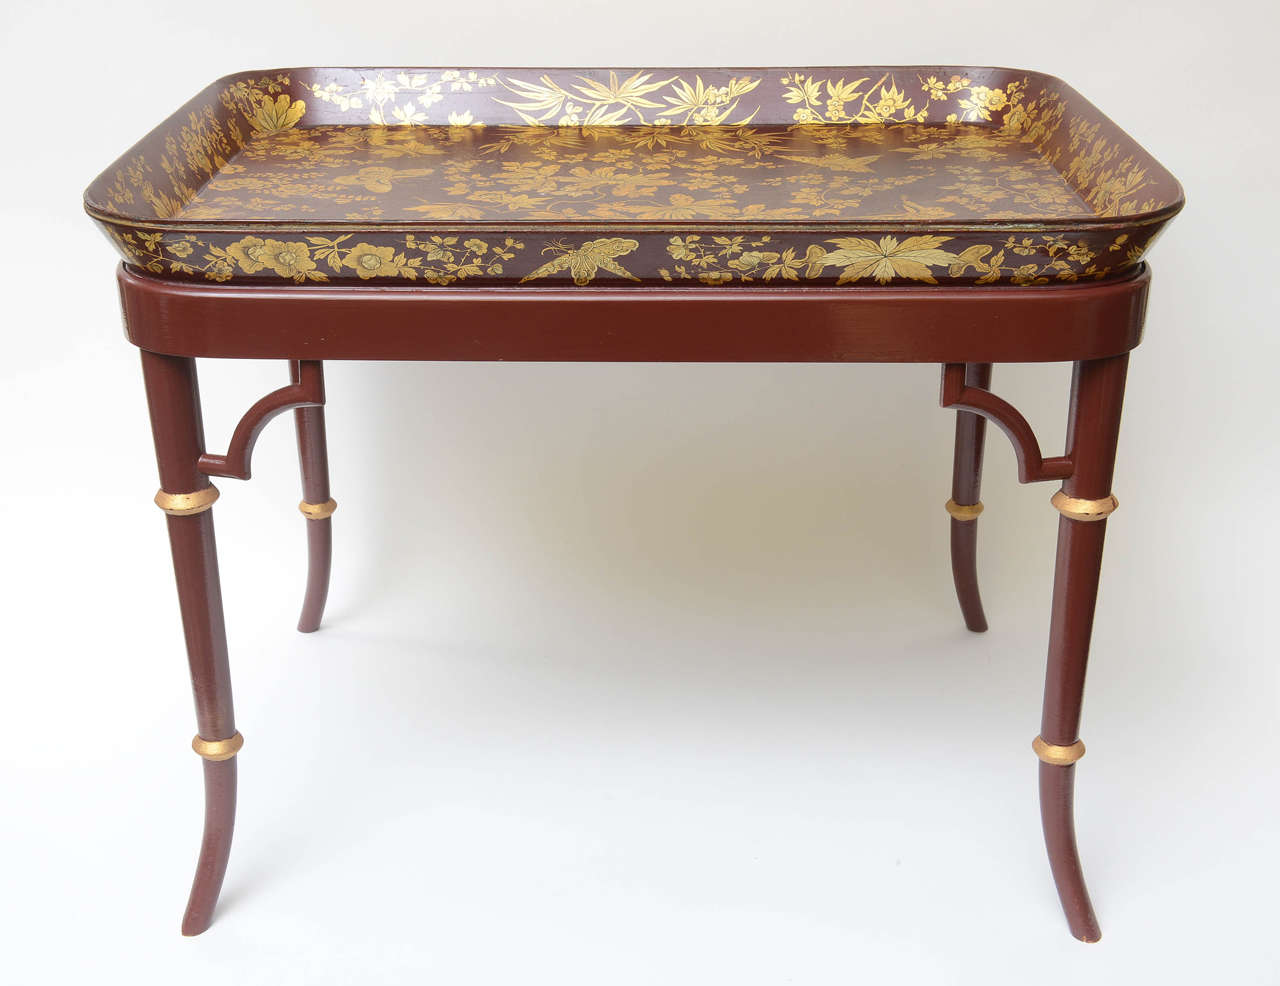 Superbly decorated and rare papier mâché tray table signed by Henry Clay, King St. Covent Garden. Henry Clay, showrooms London 1772-1821, was a patron of the royal family. Listed in the dictionary of English furniture makers pg.176.
A true